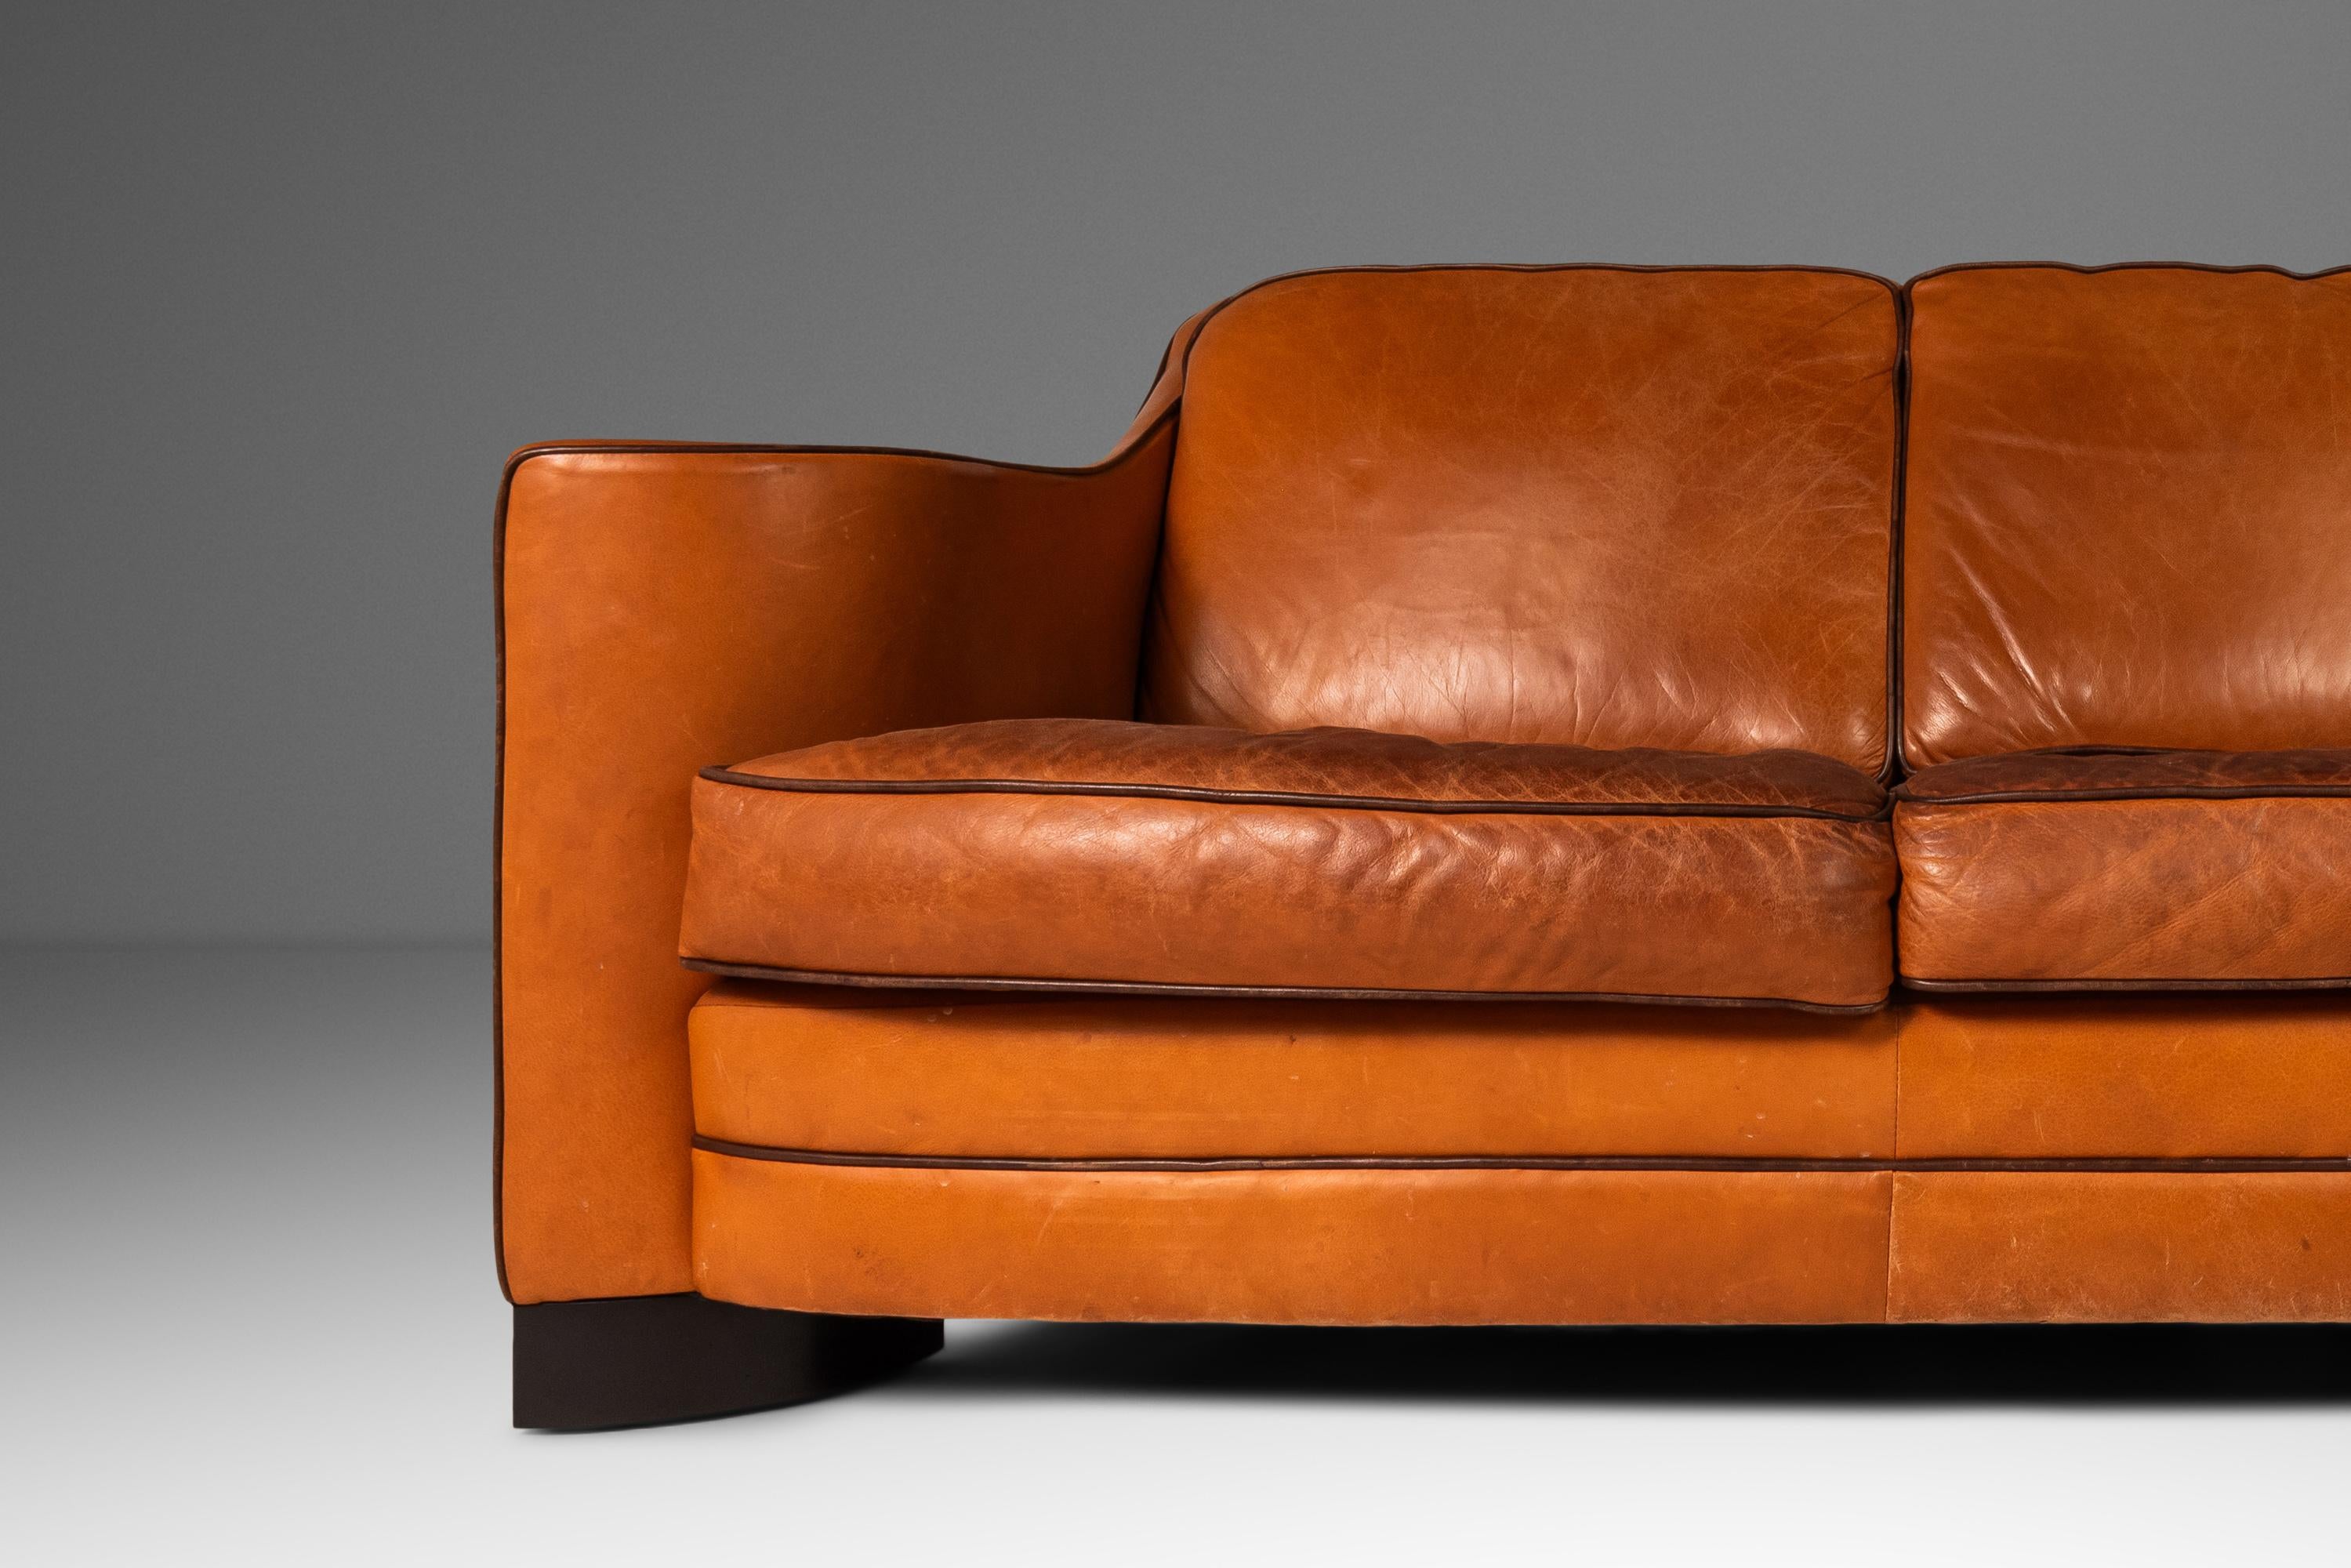 Art Deco Loveseat Sofa with Sculptural Arms in Patinaed Leather, USA, c. 1970s For Sale 12